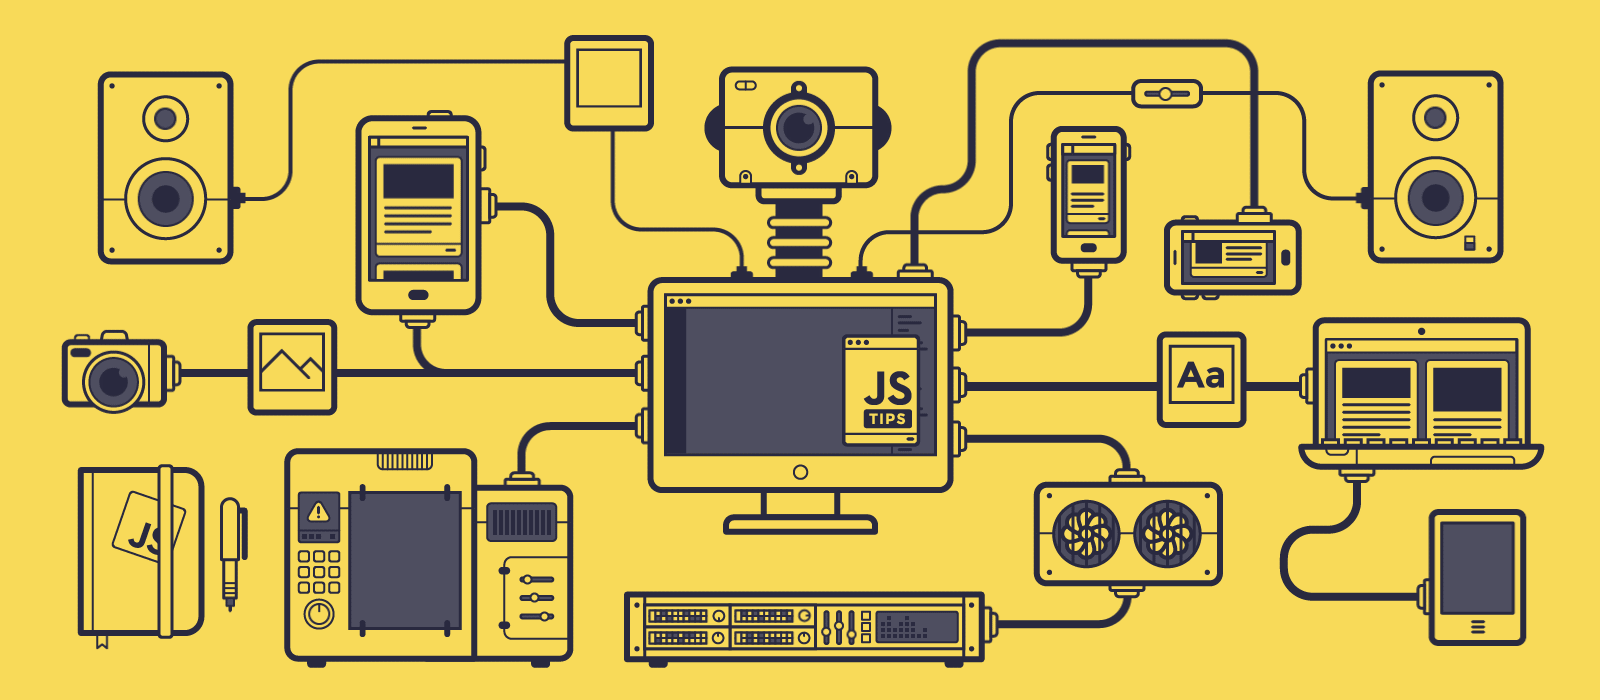 JavaScript and it’s use cases